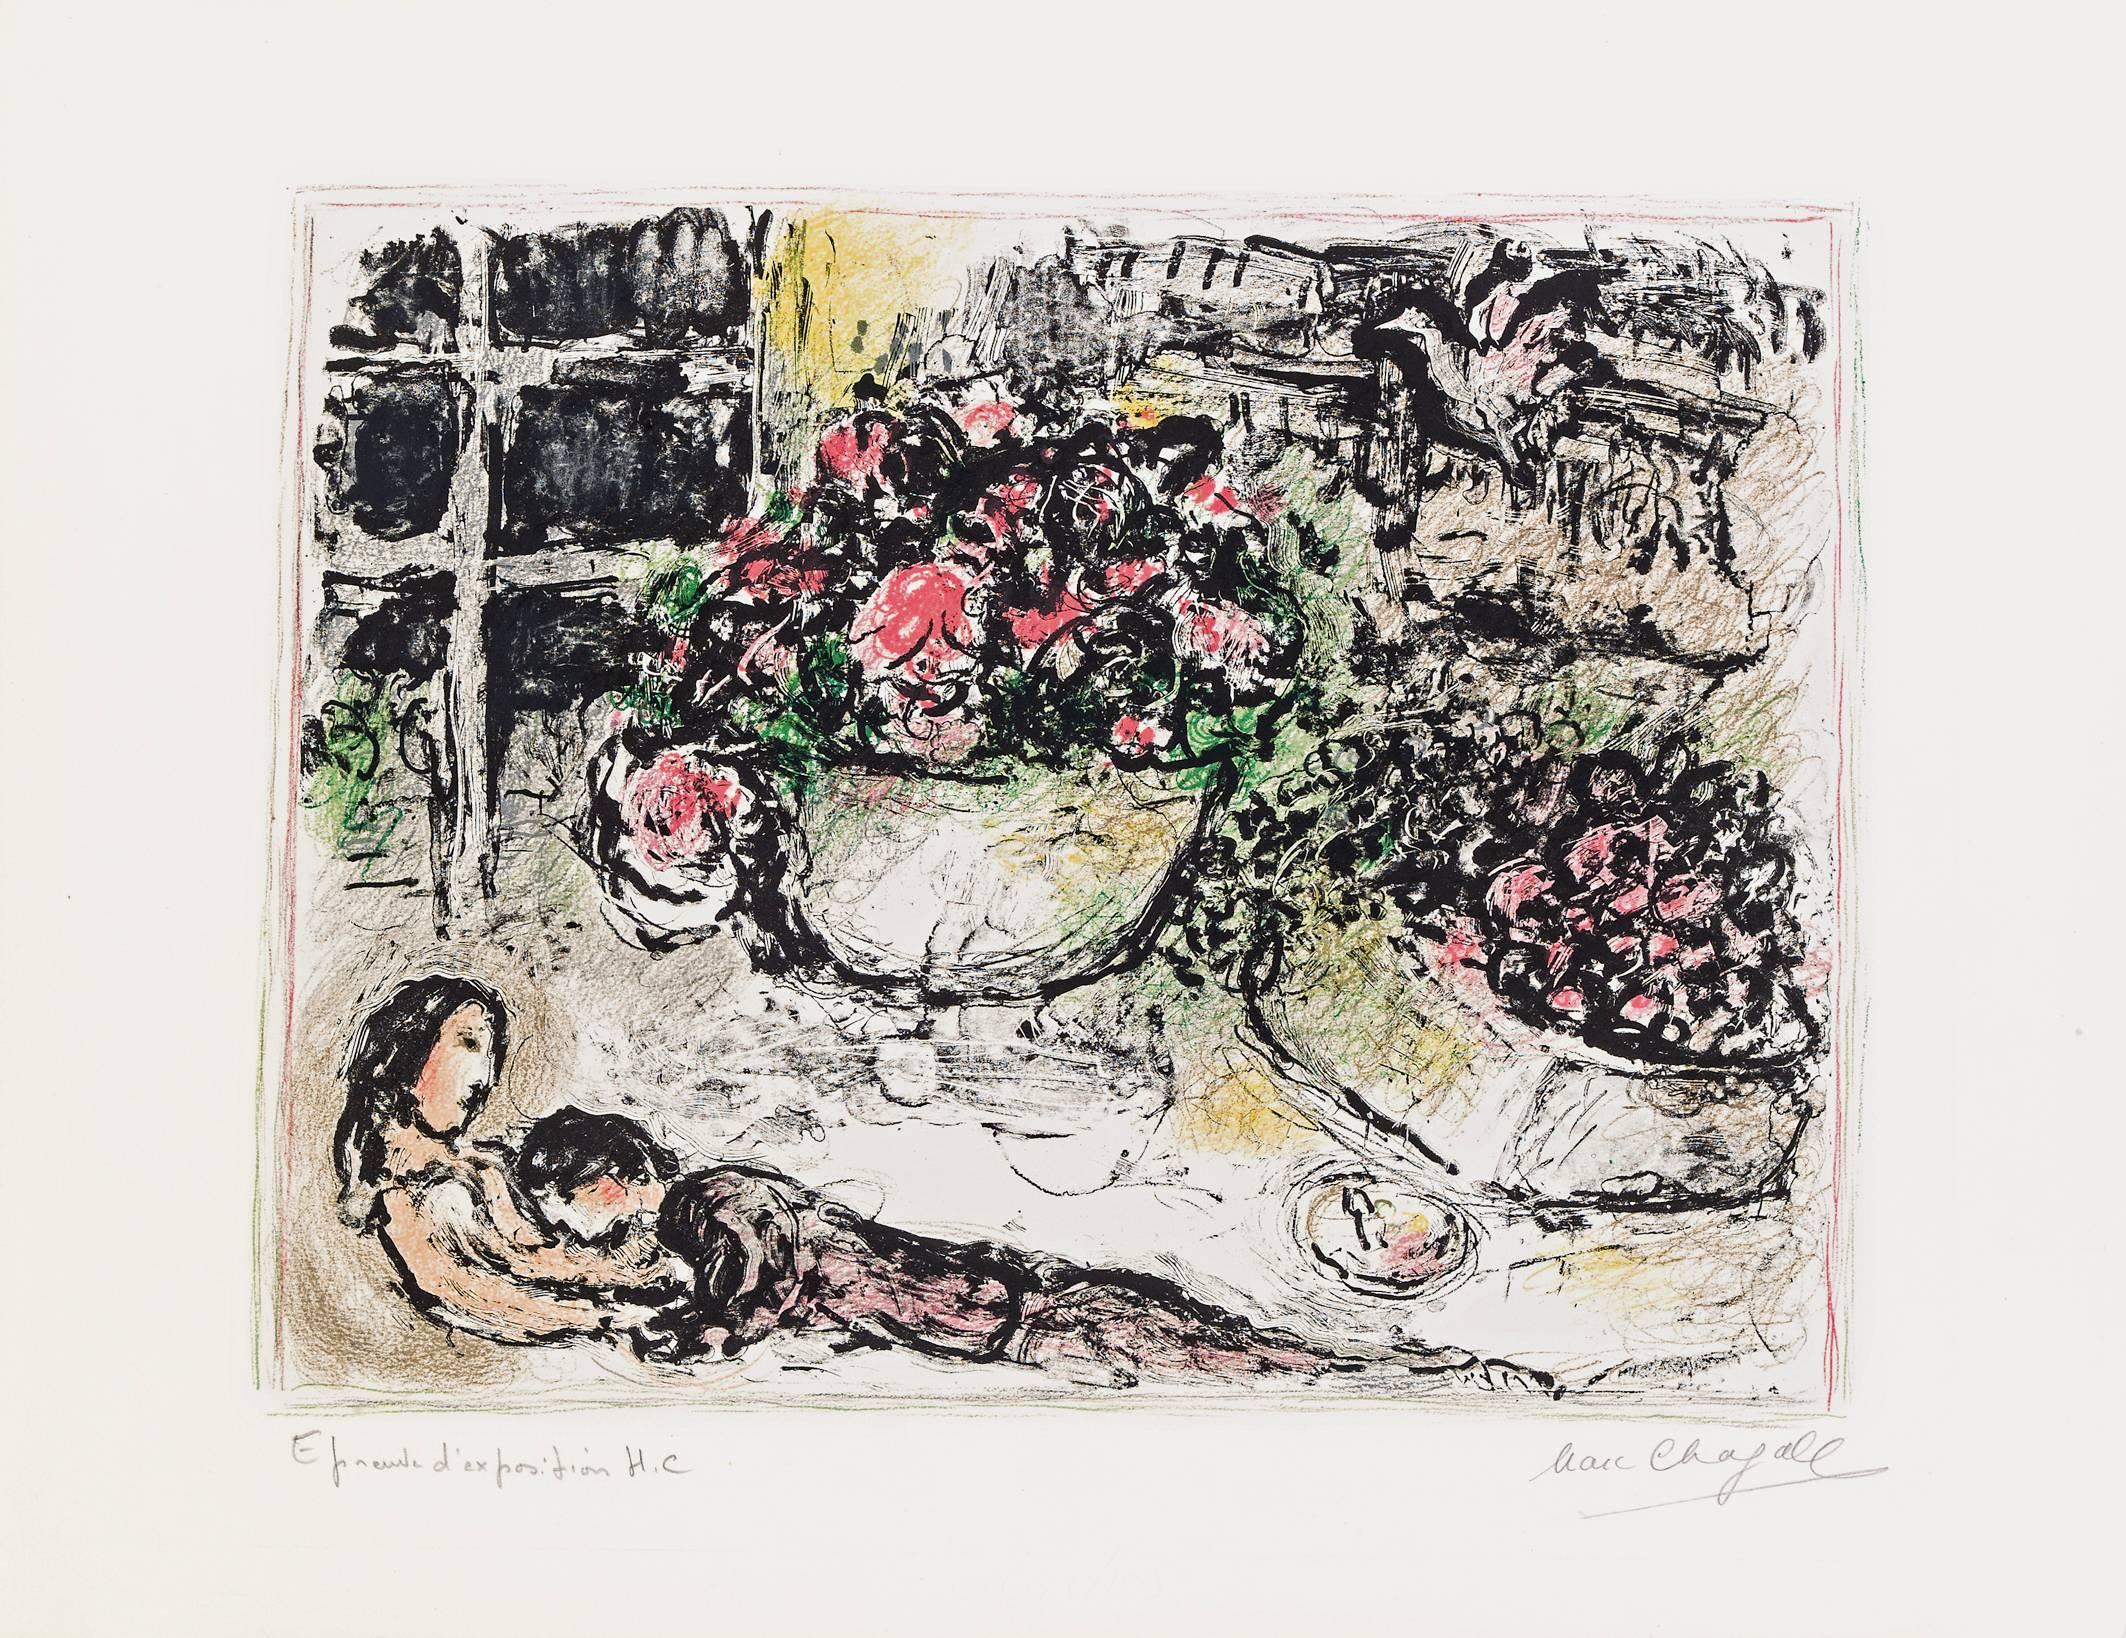 Titled with ''La Table Fleurie' this work was issued in 1973 in Paris and printed by the artesian printers of Chagall's choice, the Mourlot Brothers.
Hand singed in pencil with ''Marc Chagall'' and on the lower left with ''Epreuve d'exposition